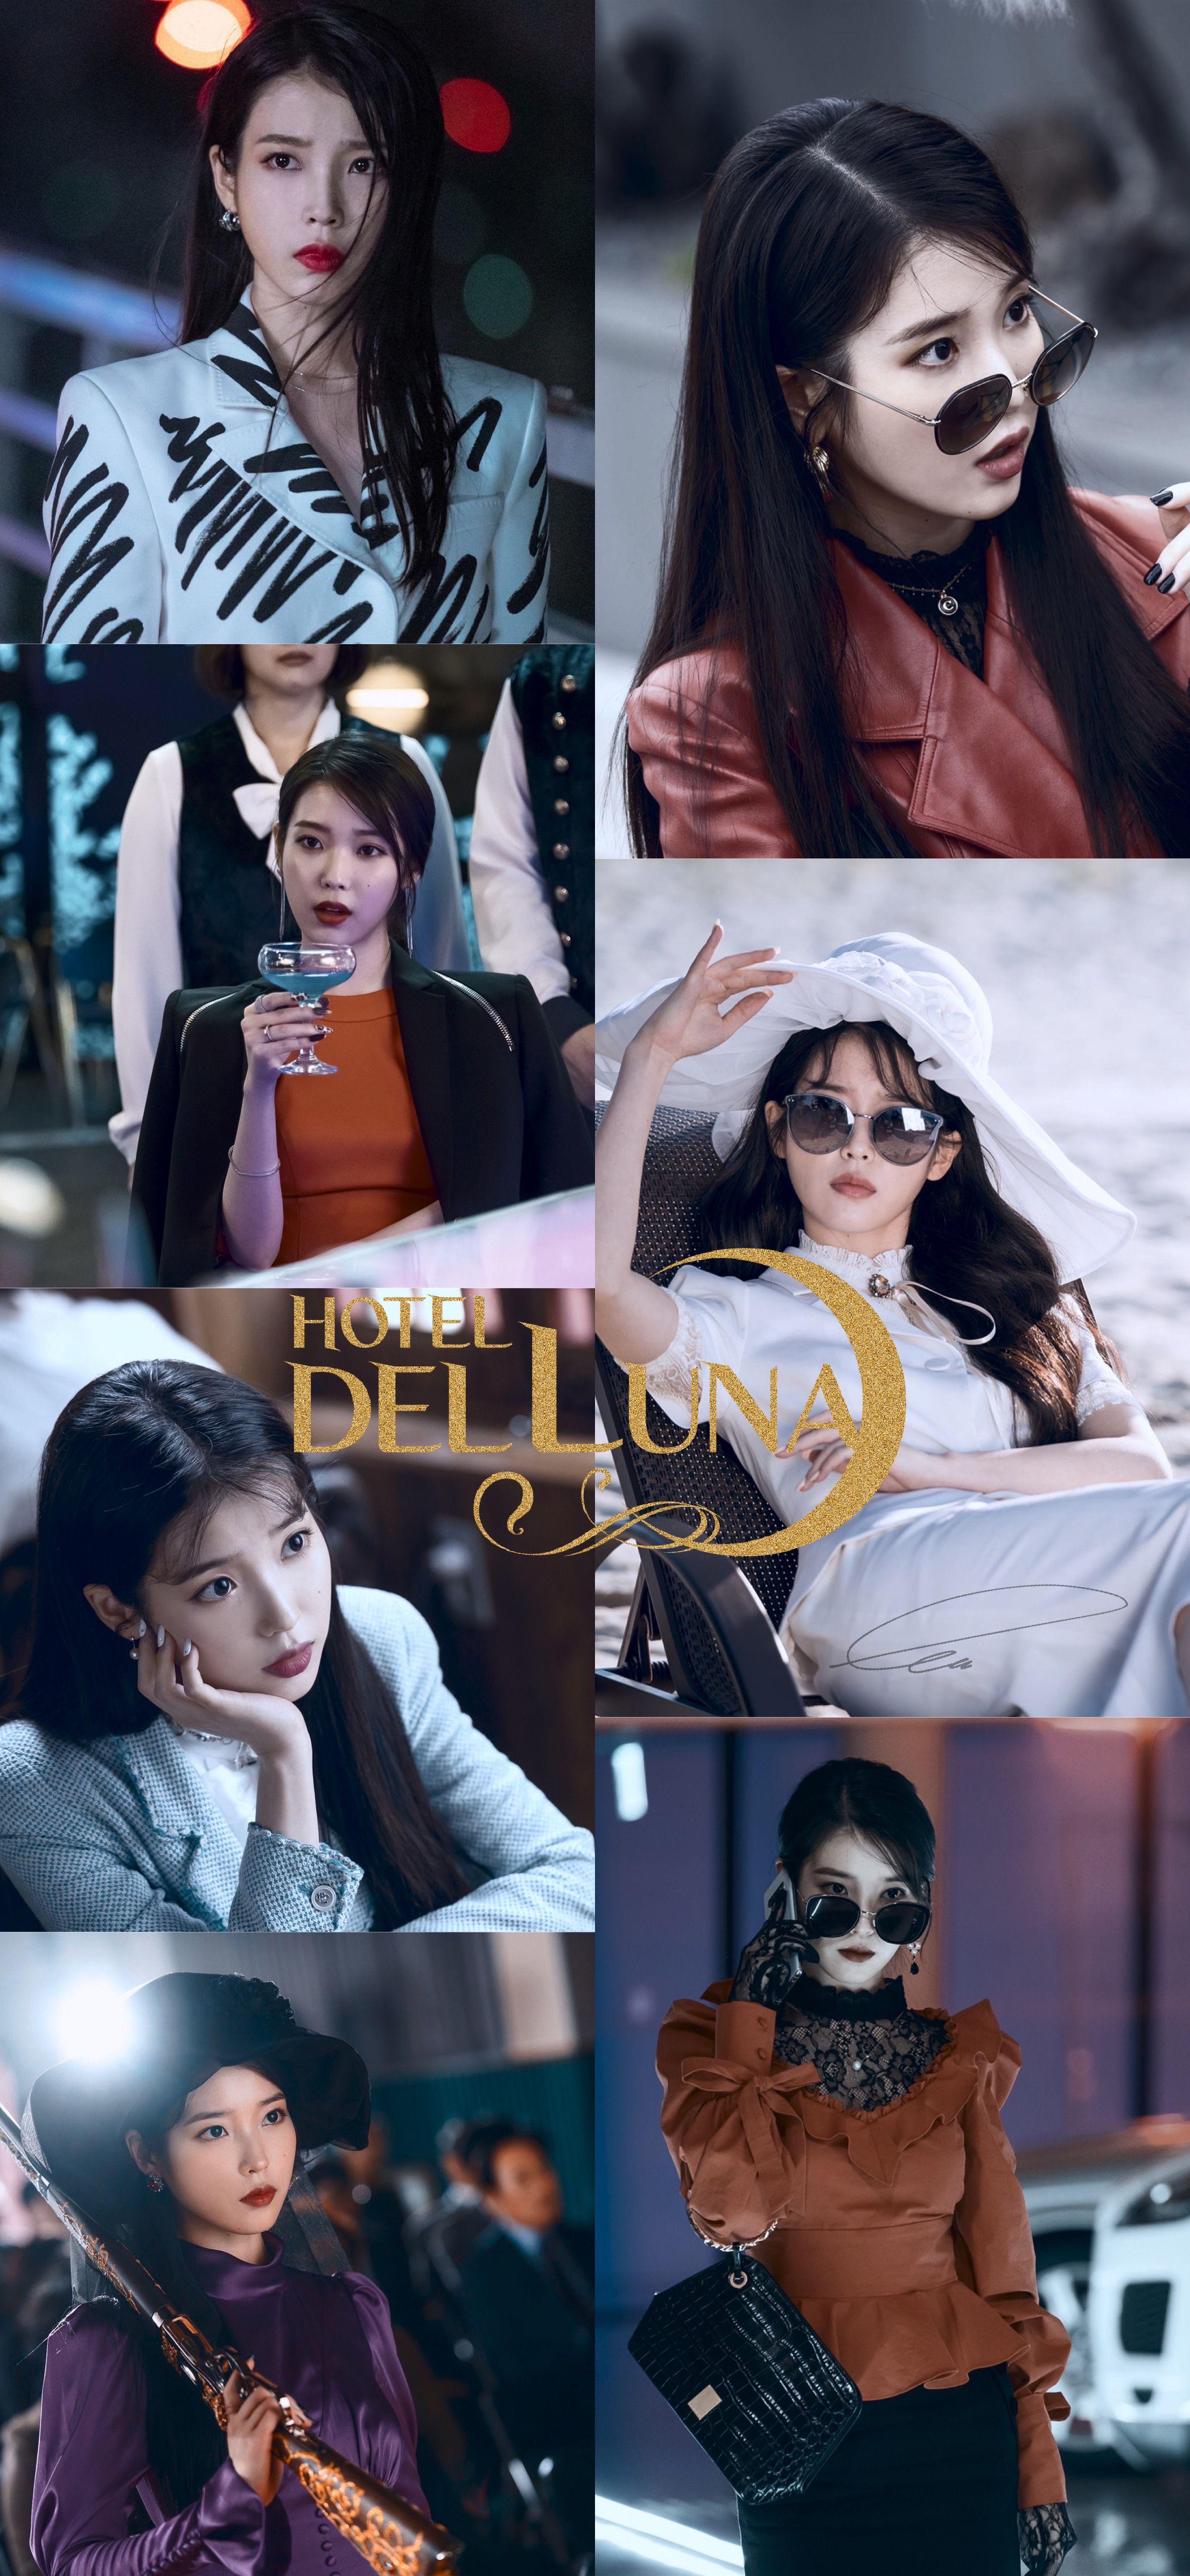 I just started watching Hotel Del Luna with my friends and decided to make this lock screen wallpaper since I'm OBSESSED with Man Wol. IU is just such a great actress and